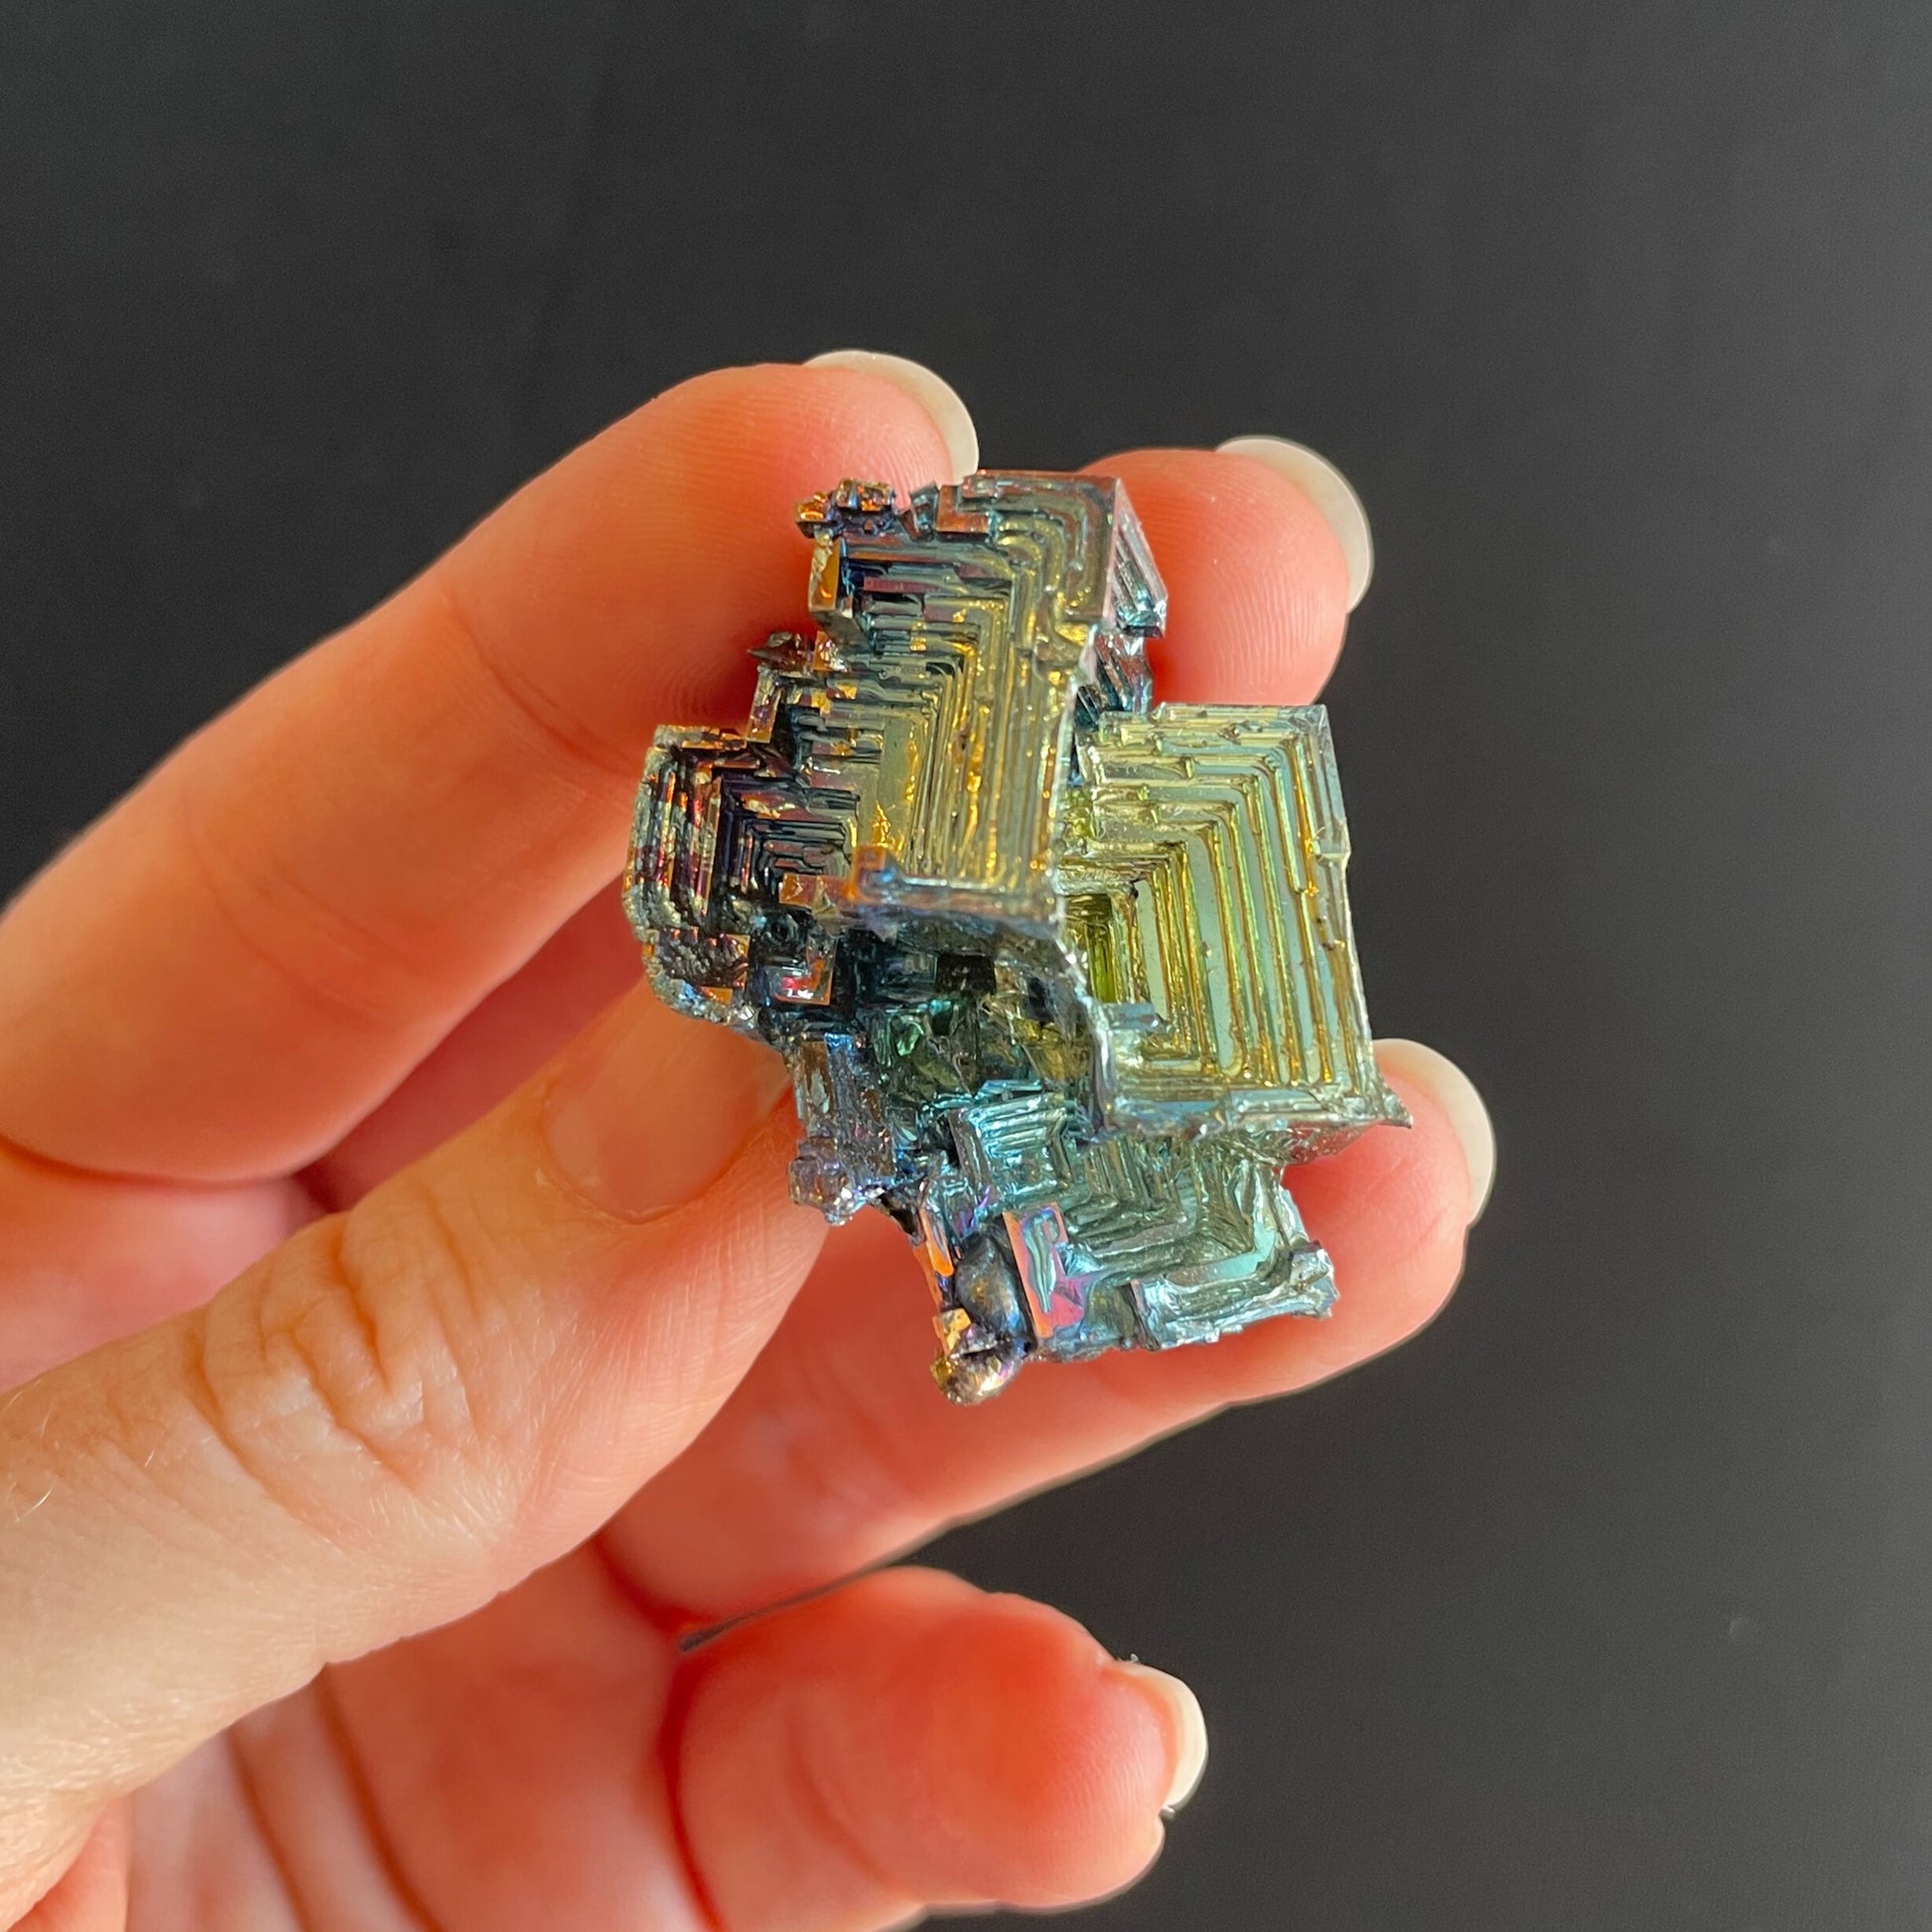 Assorted mini bismuth specimens, ranging from 2 mm to 3 mm in size, showcasing vibrant iridescent colors and intricate crystalline formations on a black background.